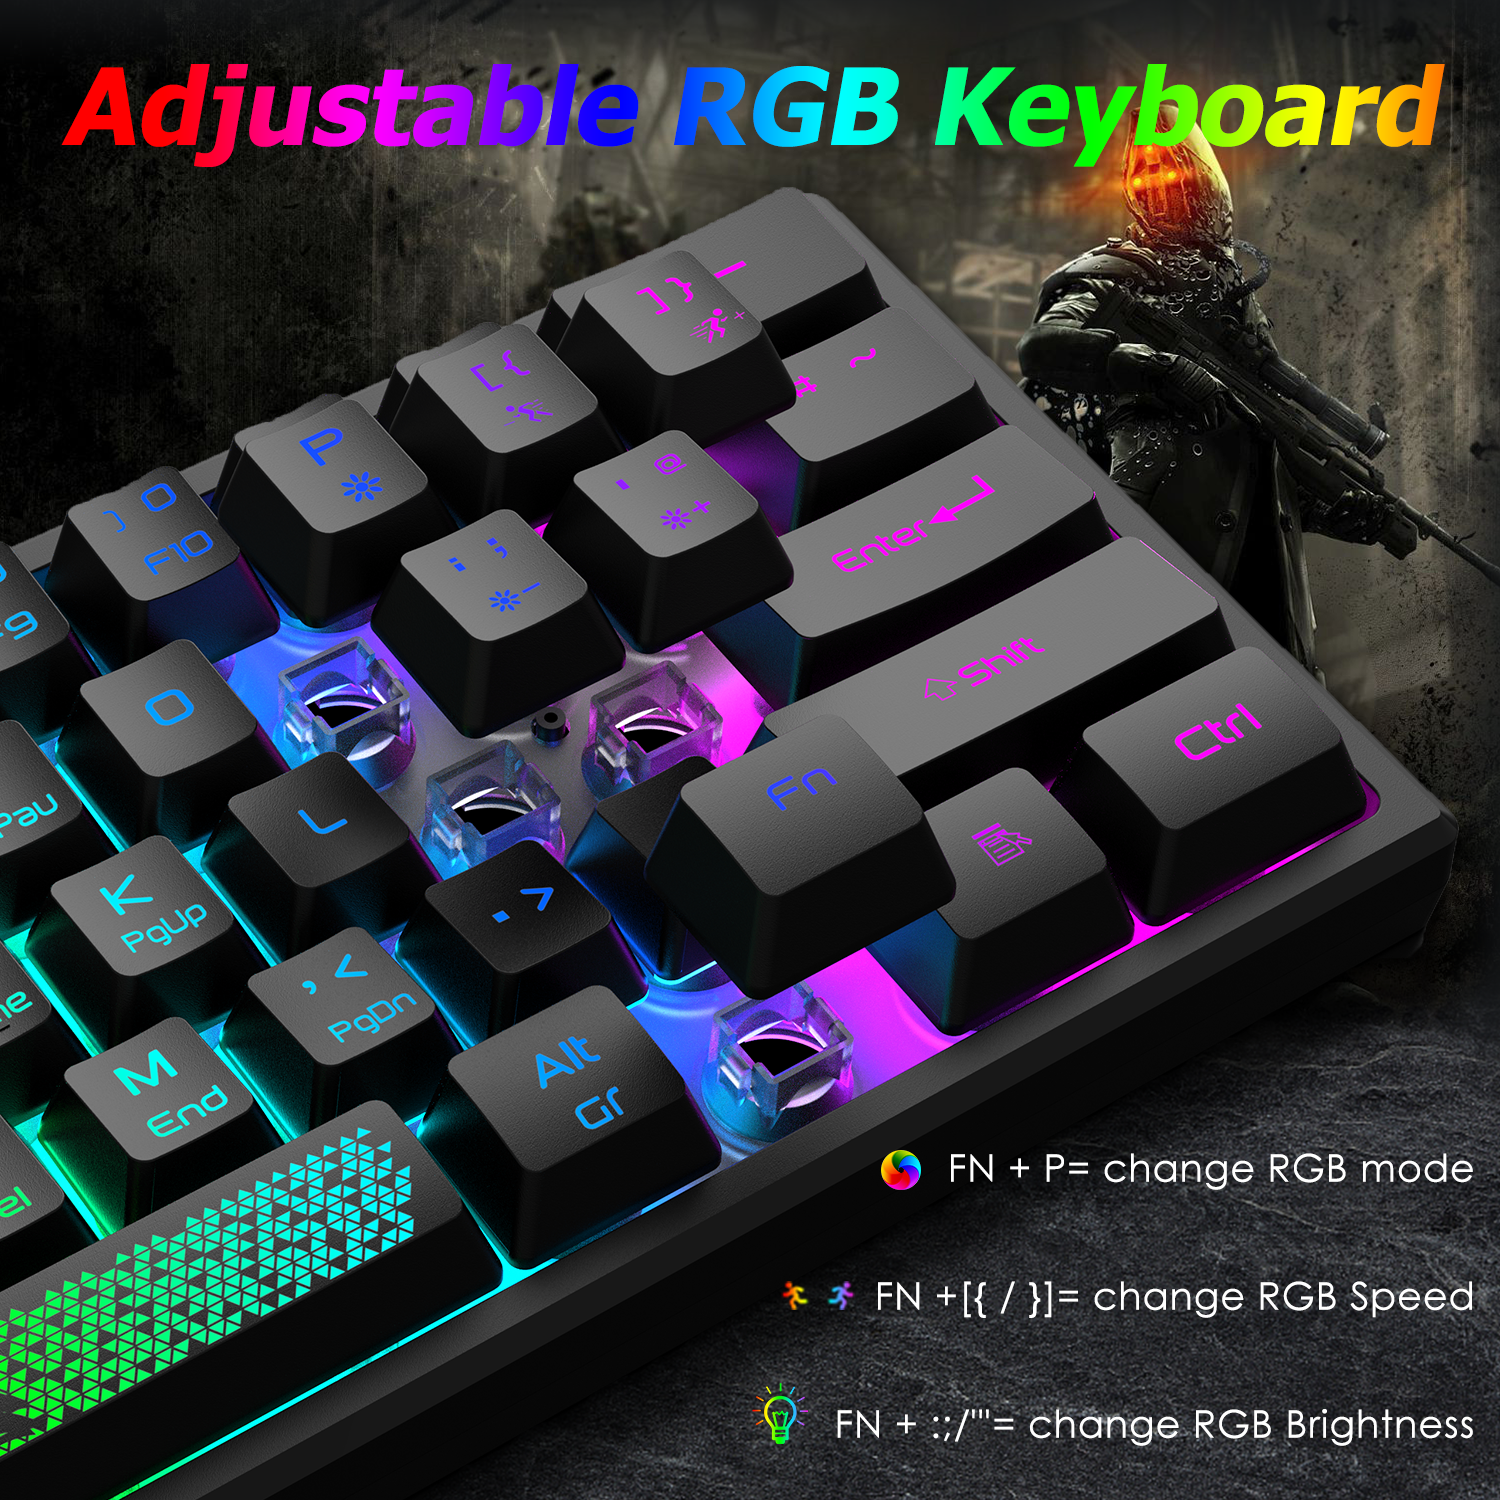 ZIYOU LANG K61 - 60 Percent Compact Gaming Keyboard UK Layout Ultralight LED Backlit Mechanical Feel PS4 Laptop PC Accessories